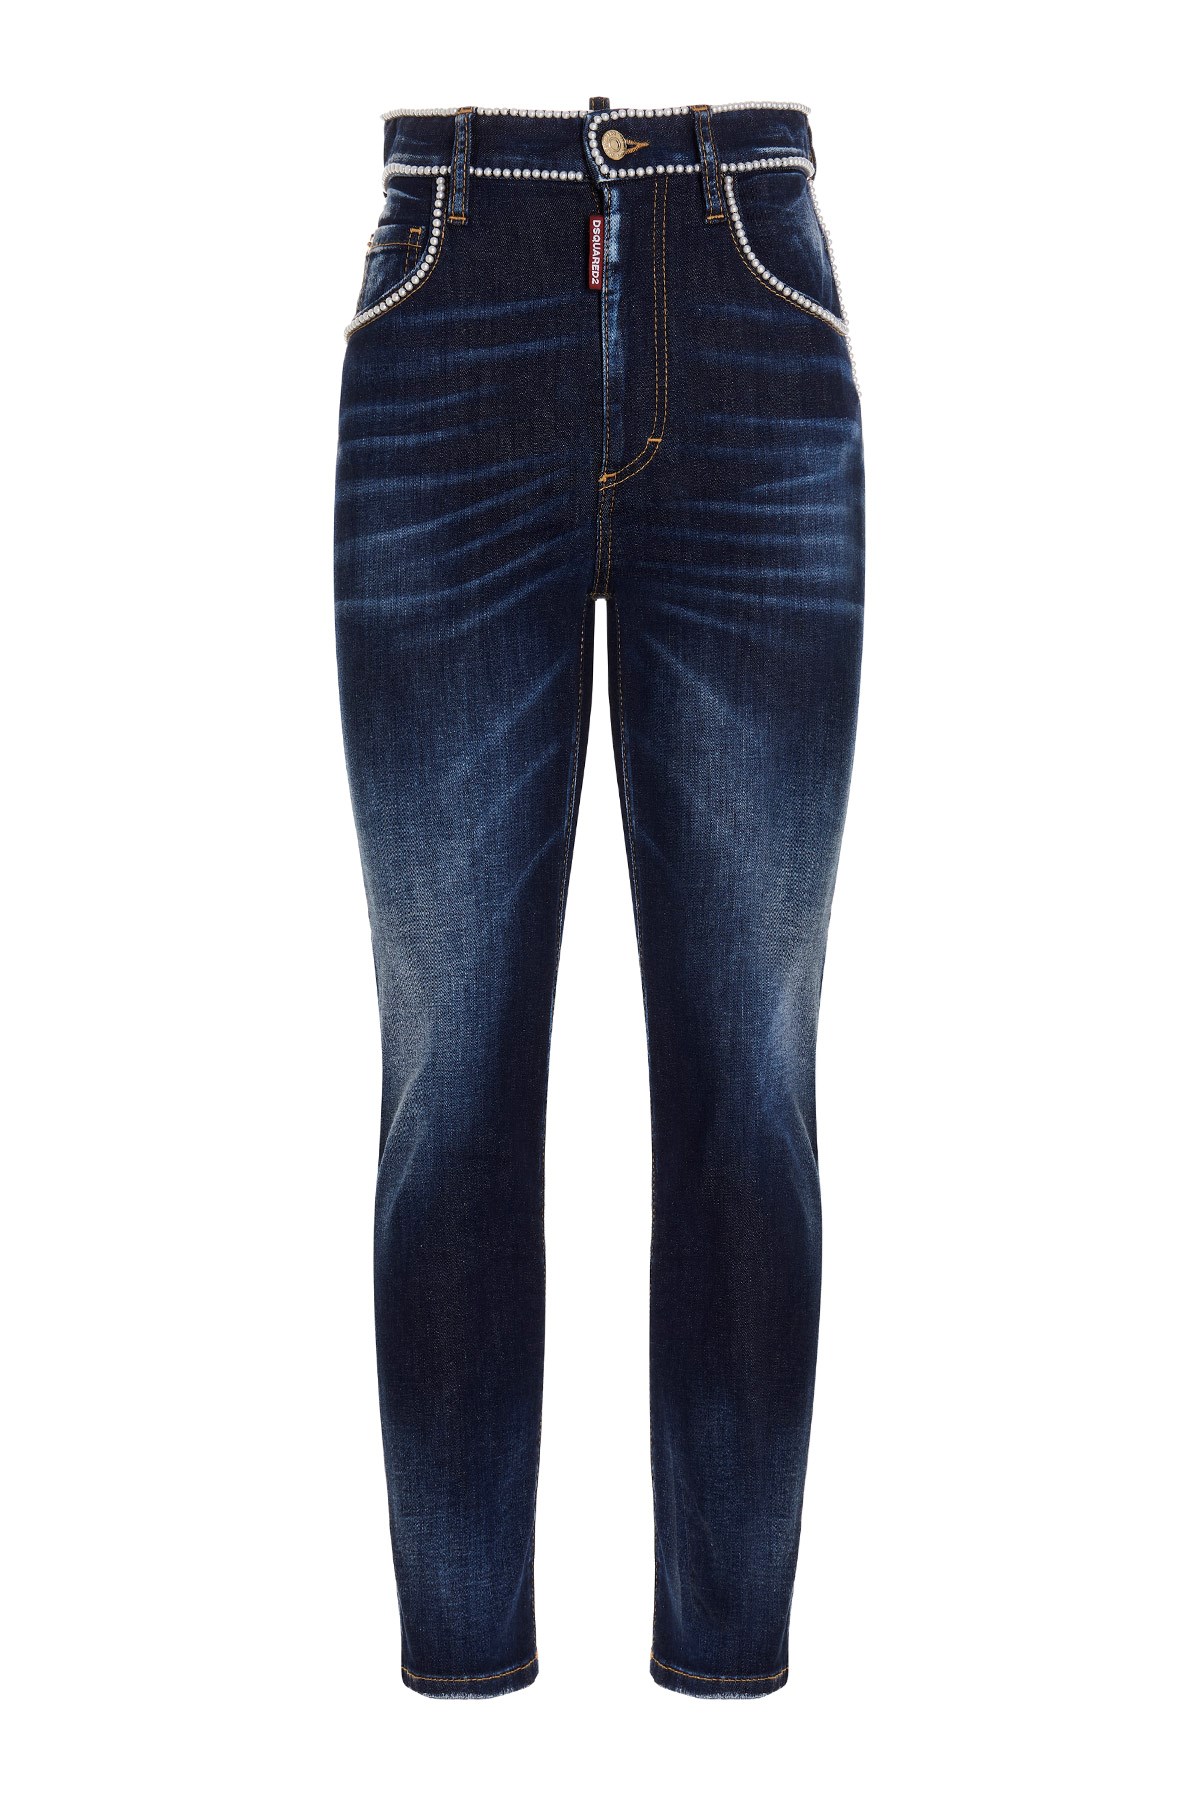 DSQUARED2 'High Waist Cropped Twiggy Jean’ Jeans